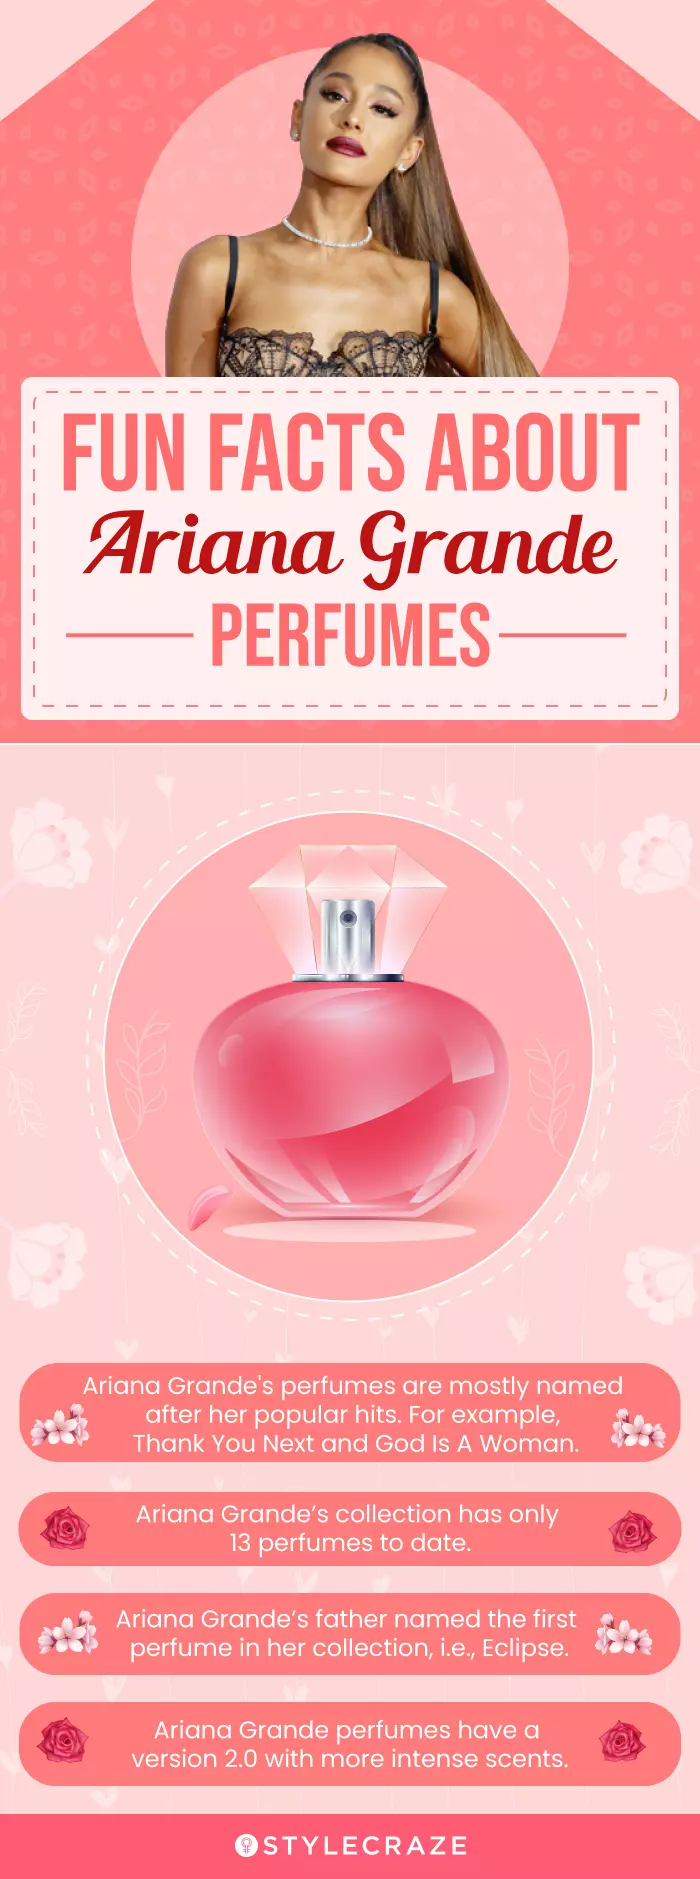 Facts To Know About Ariana Grande Perfumes